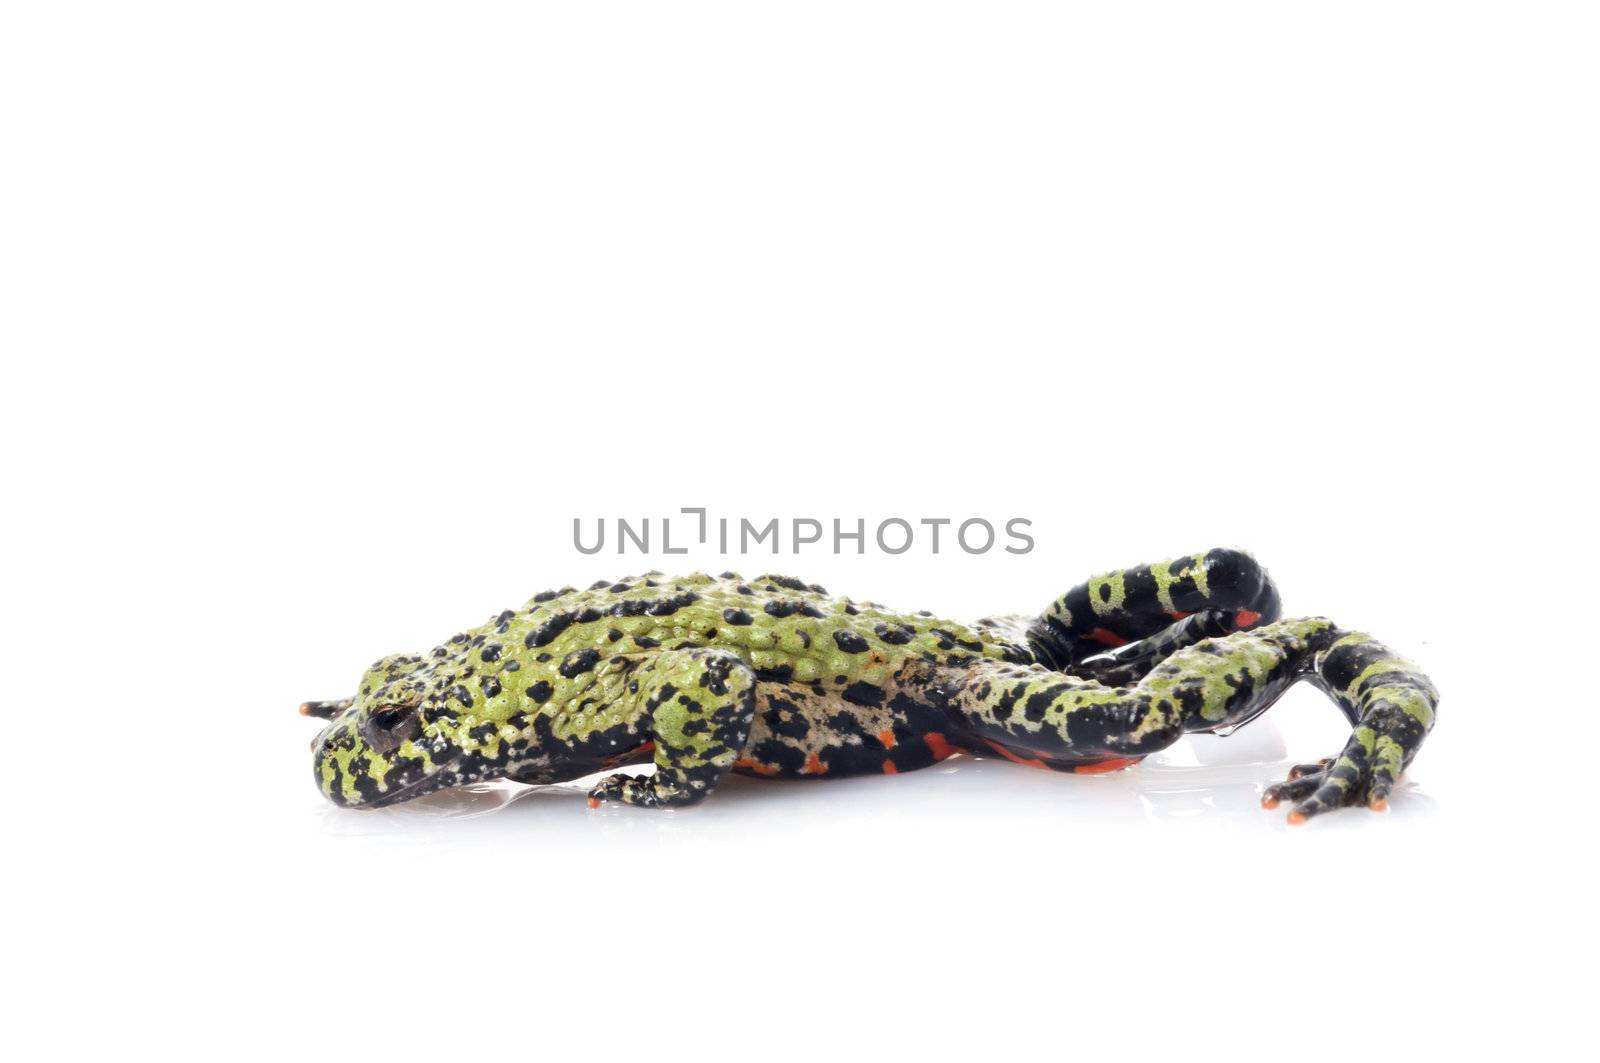 Fire Belly Toad by Njean